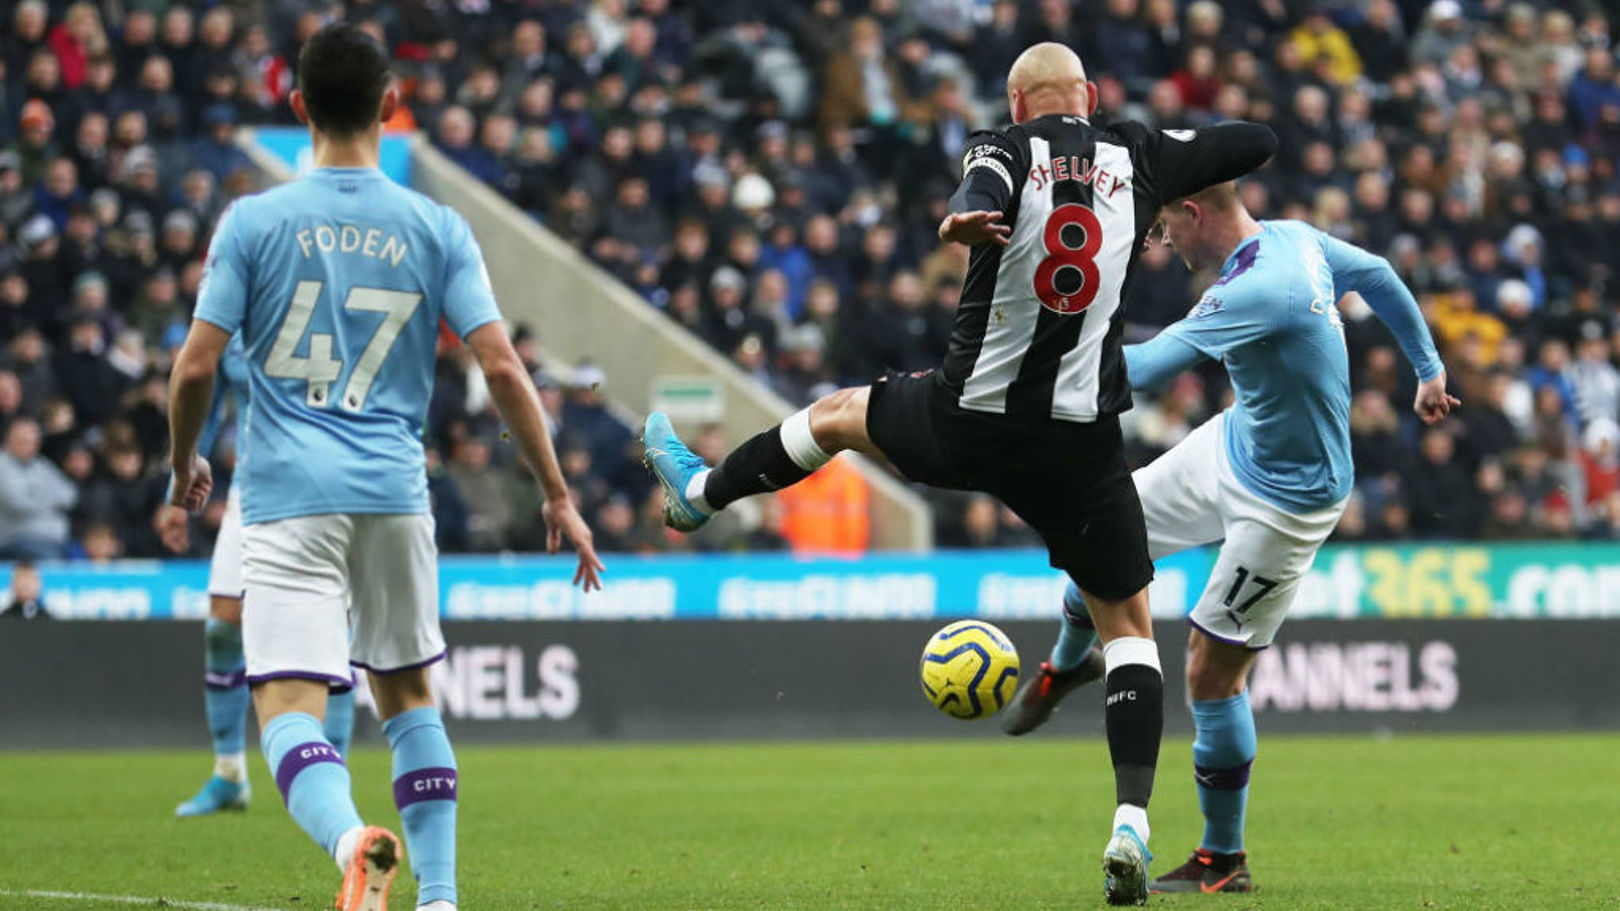 IN OFF THE BAR: De Bruyne produced a world-class strike to put City back ahead